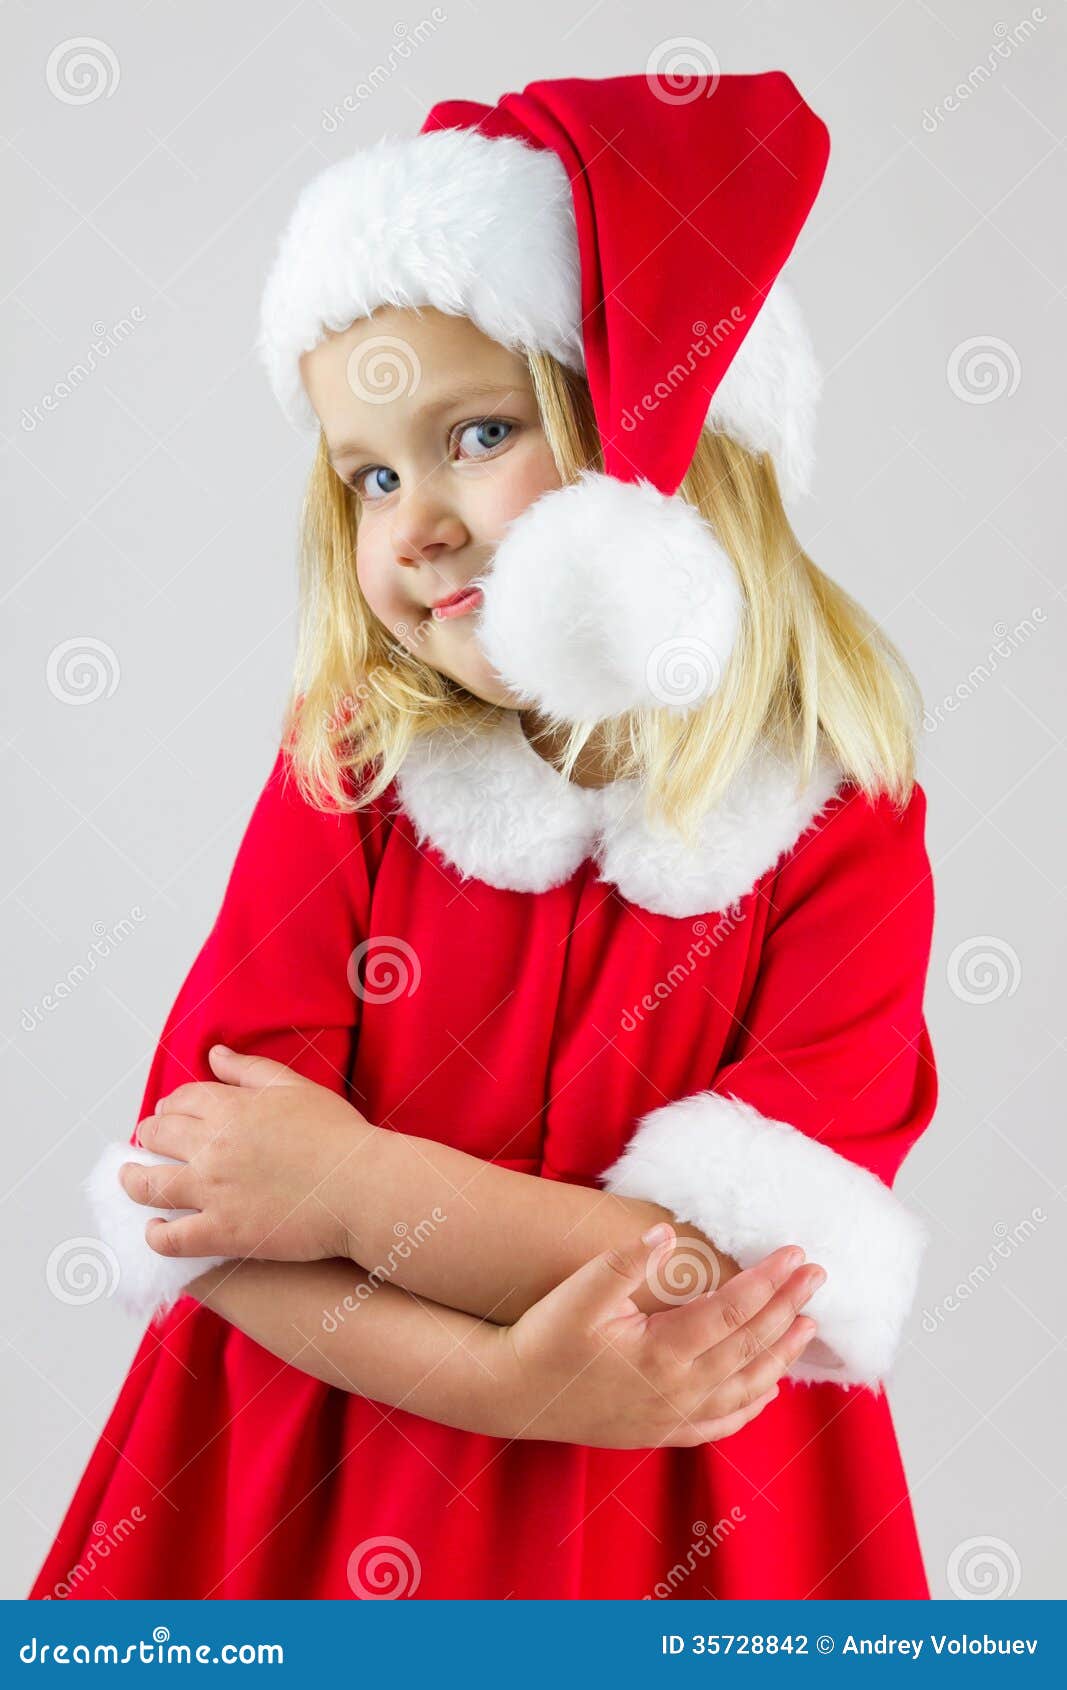 Portrait of a Girl in a Red Christmas Costume Stock Photo - Image of ...